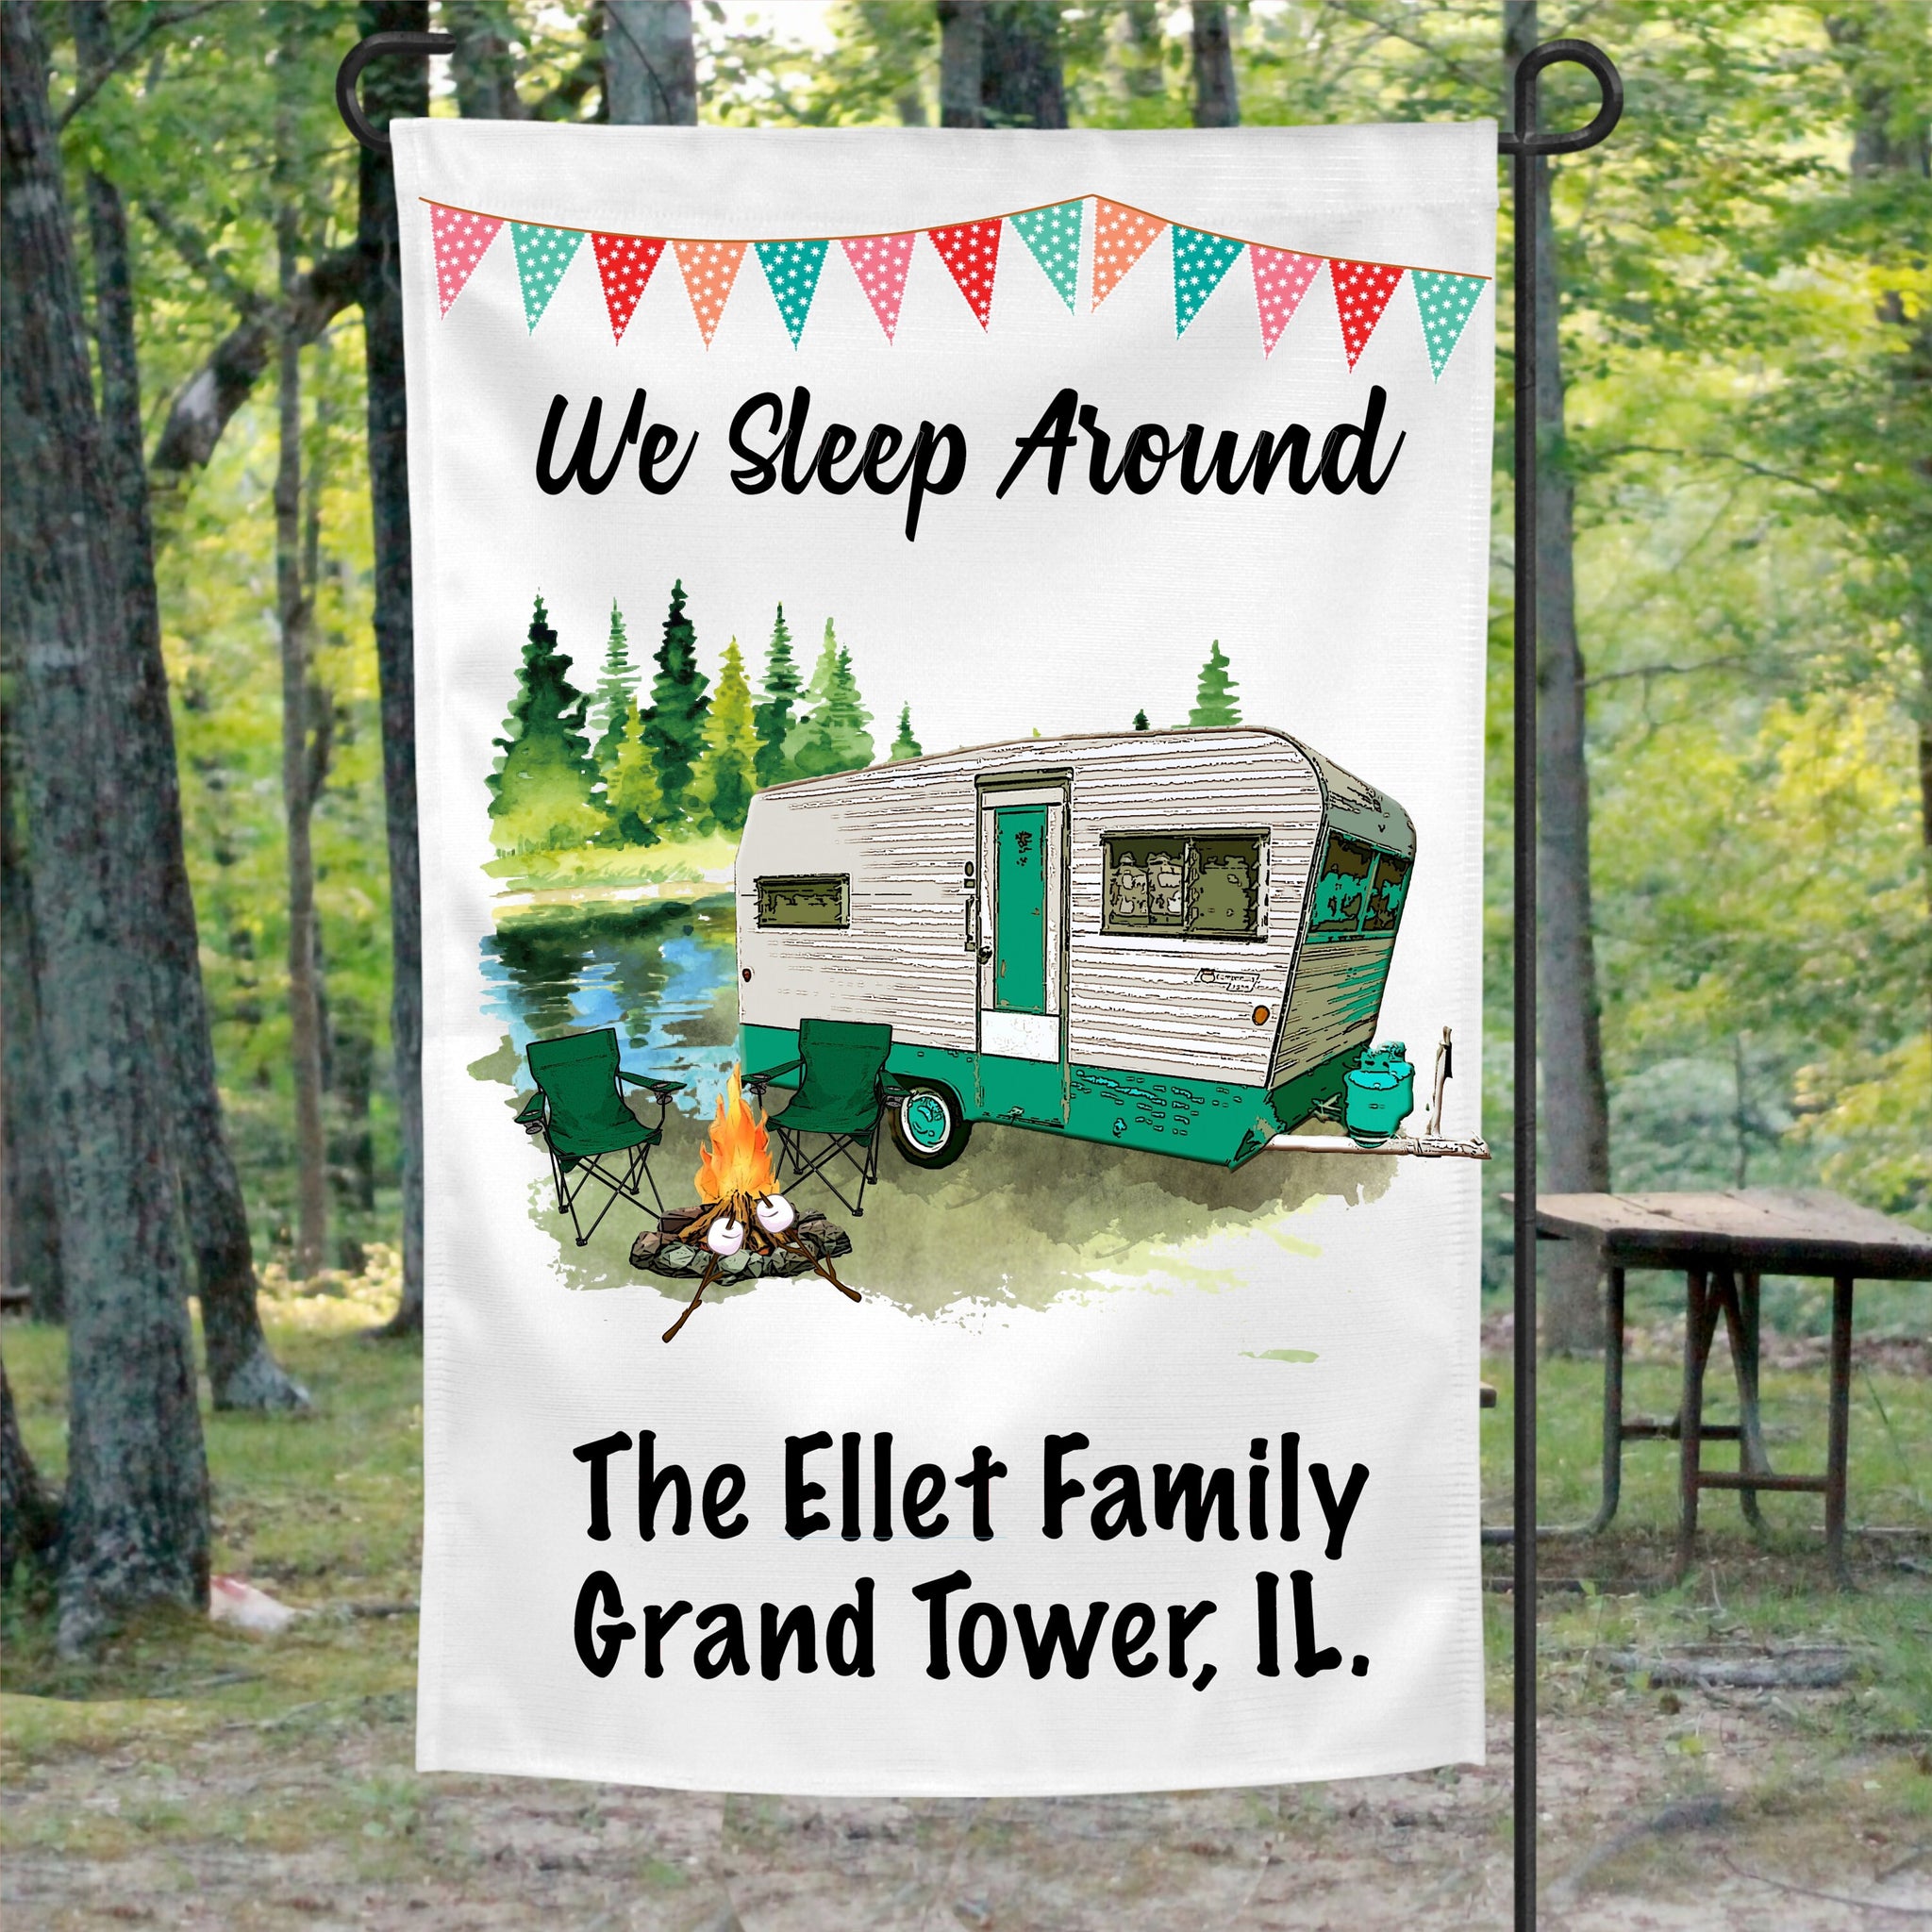 Personalized Flag, Camping Flag, Custom Garden Flag, Campsite Flag, Camping Accessories